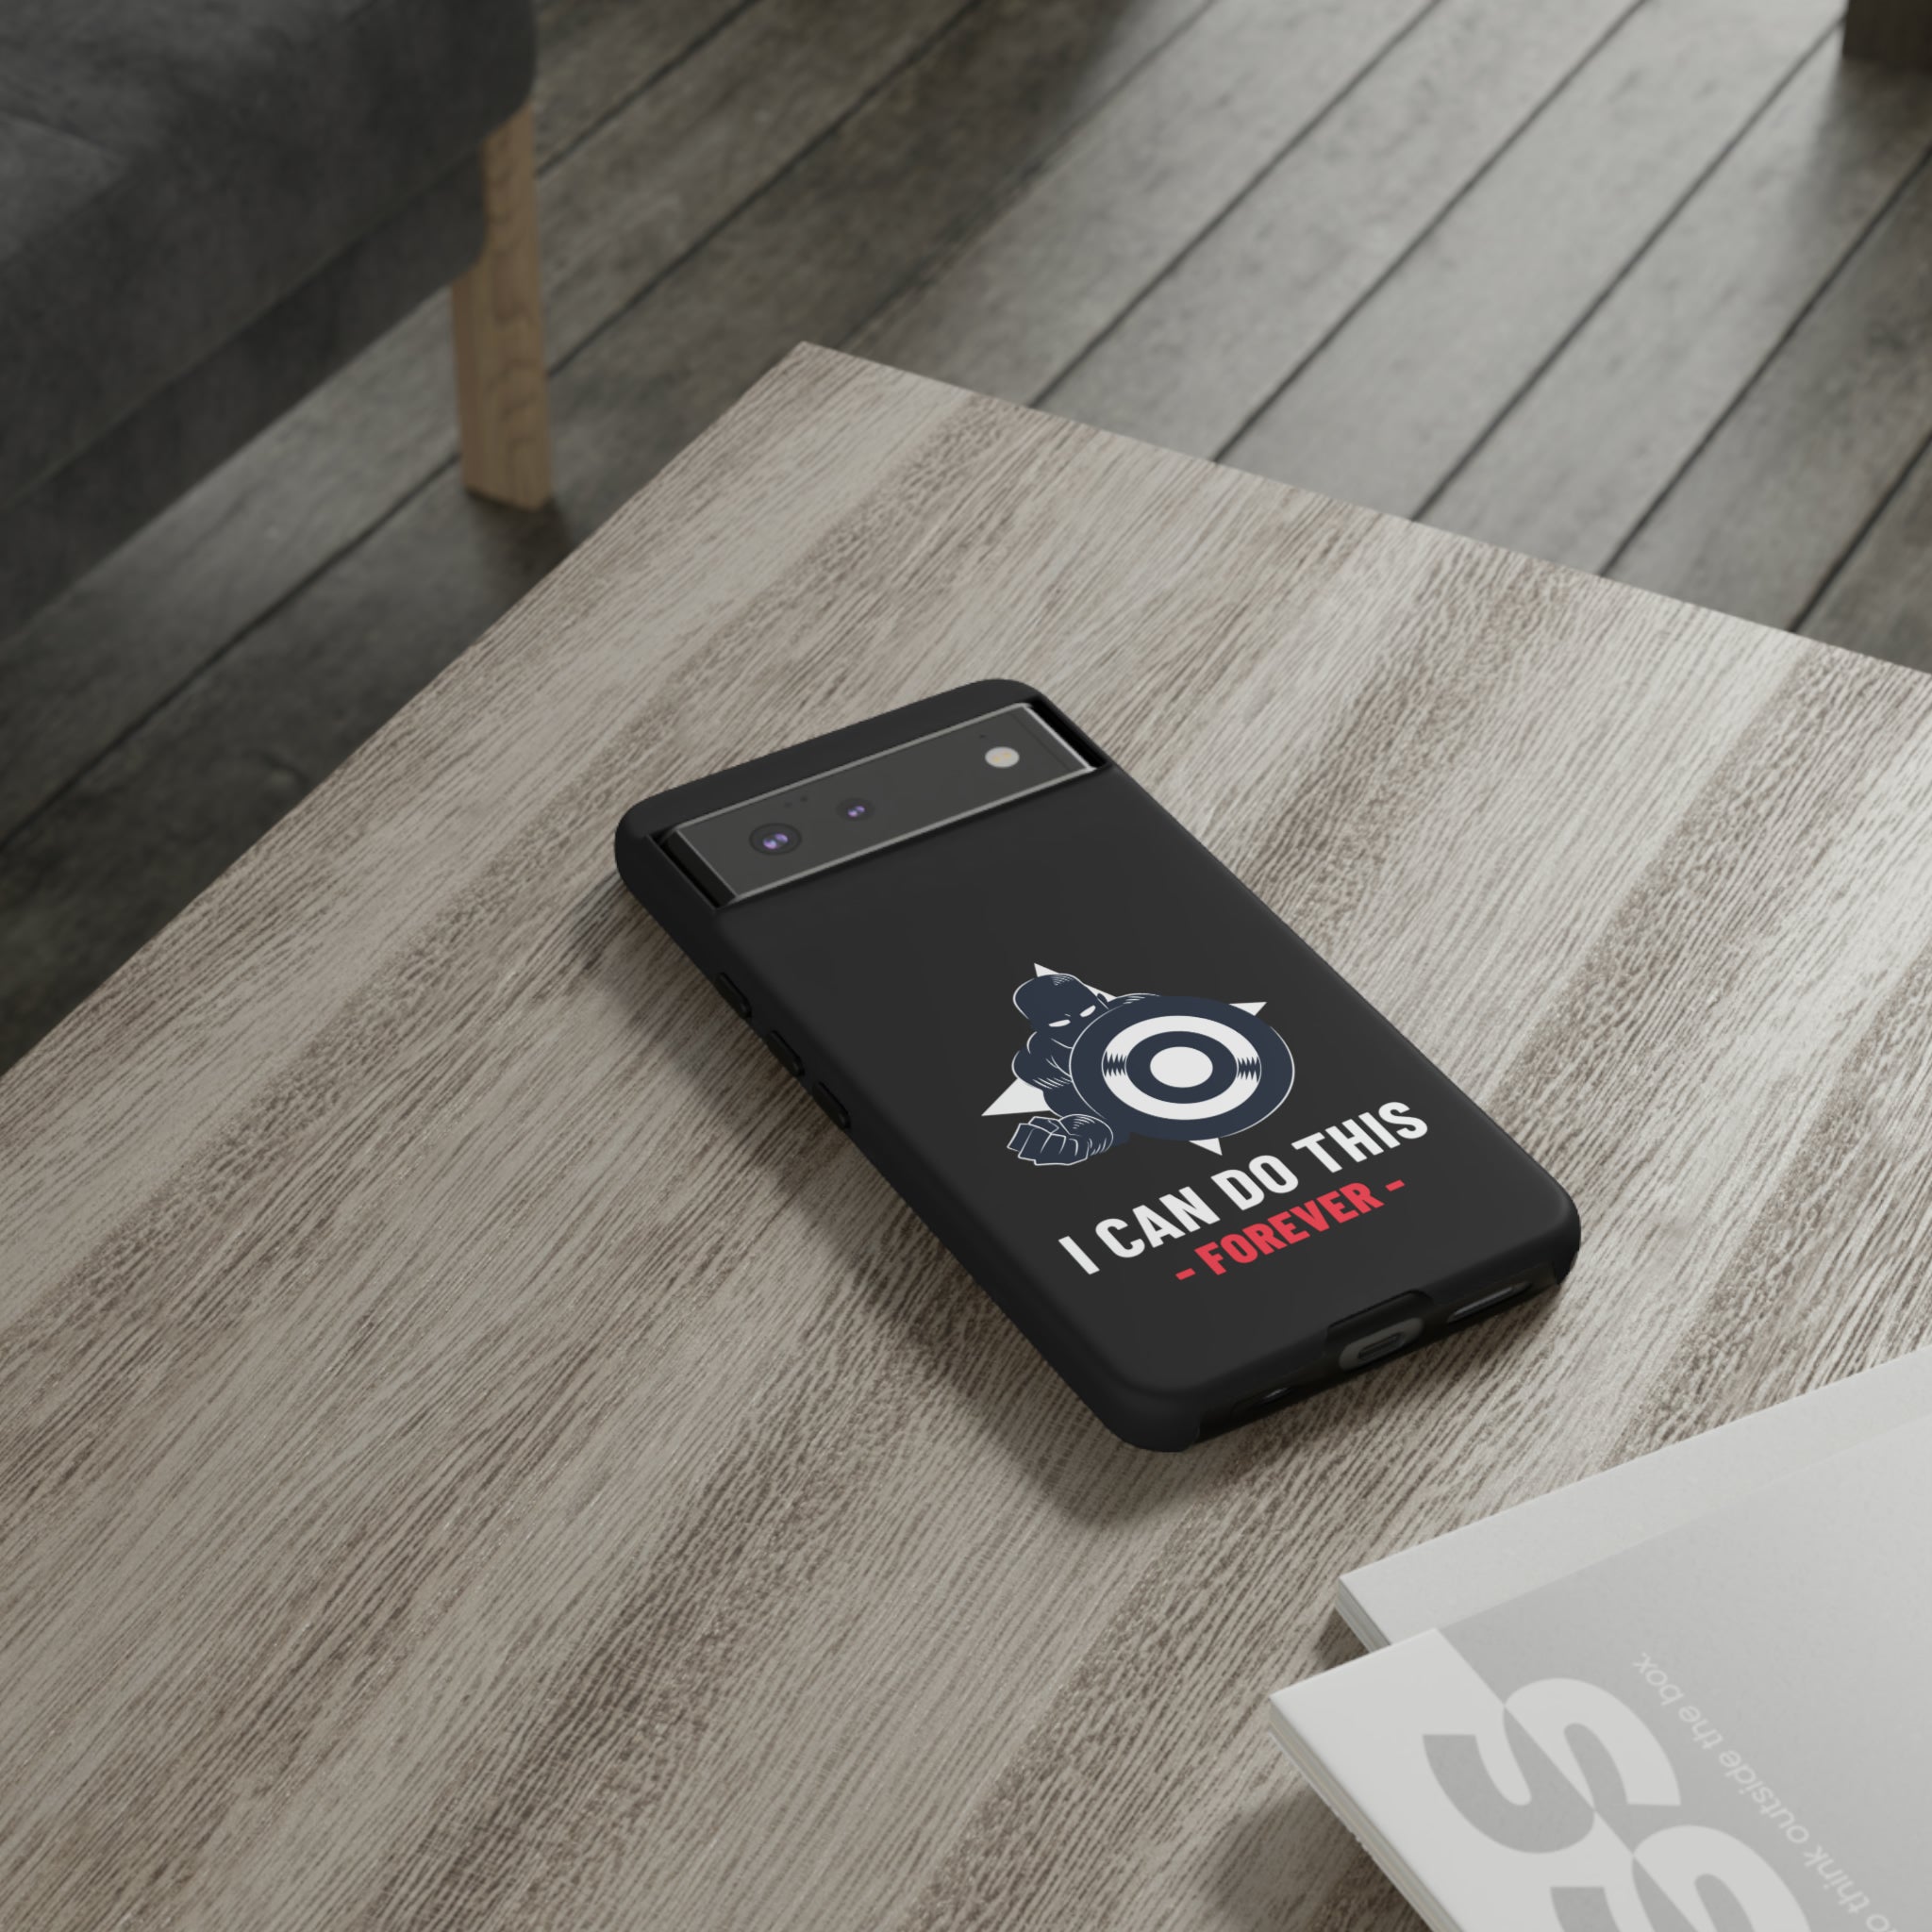 I Can Do This all Day | Captain America Printed Phone Case